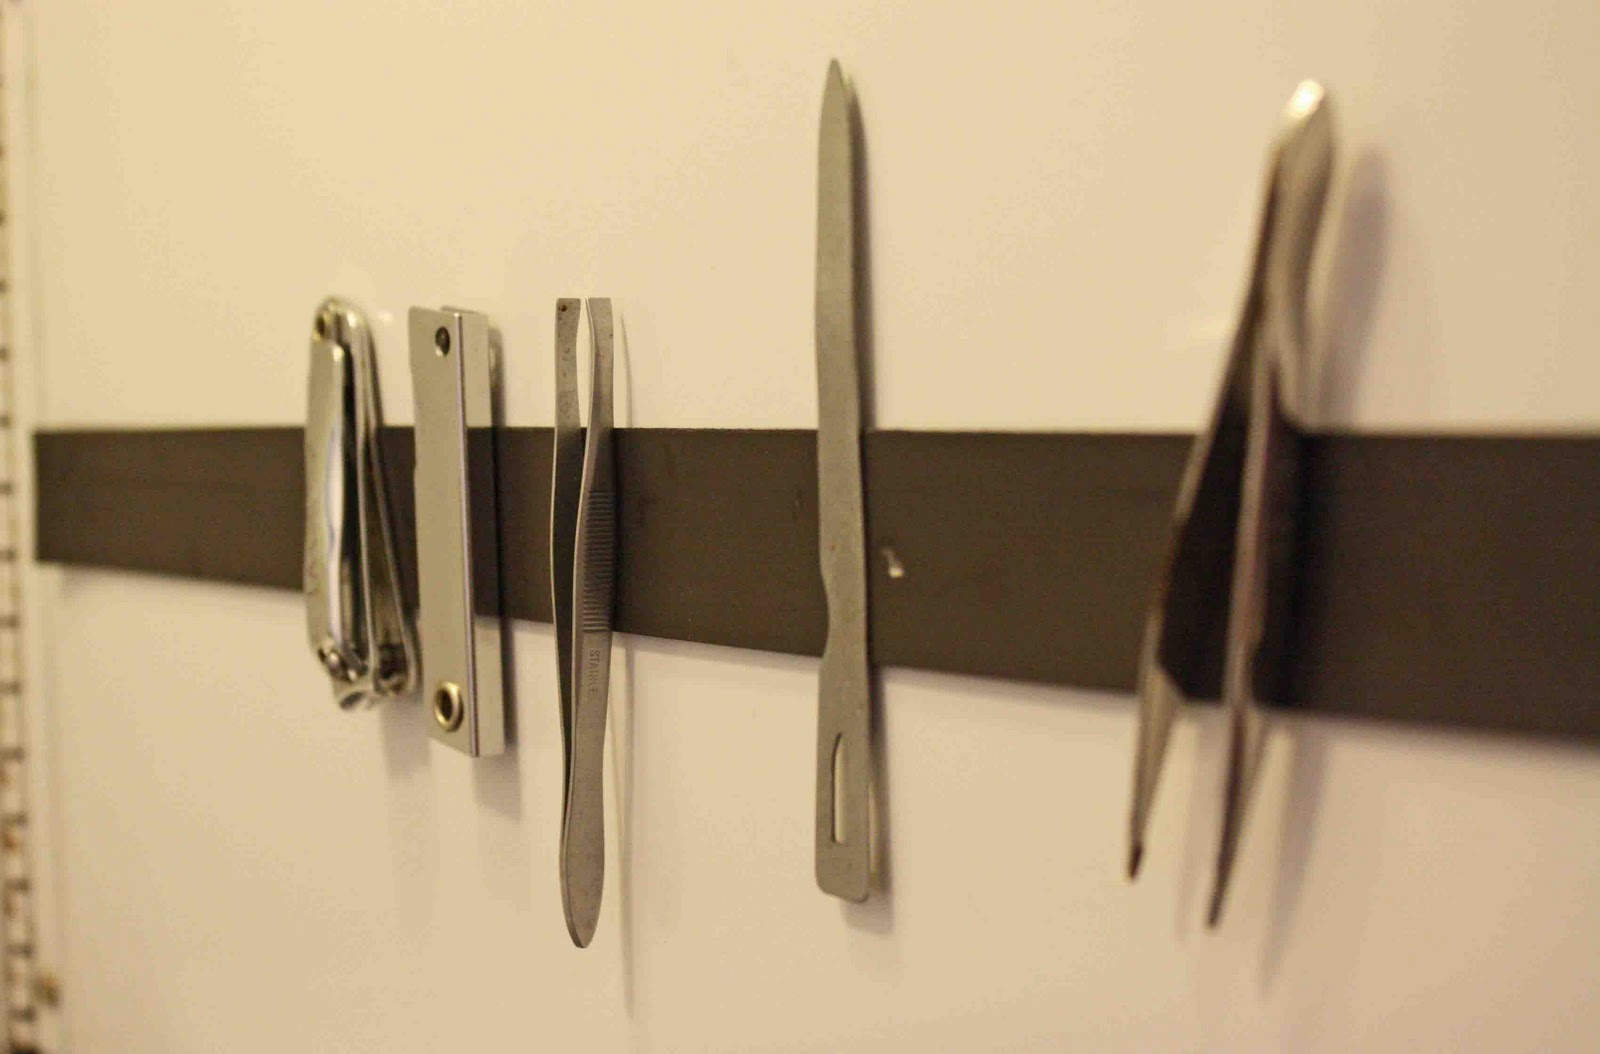 Add a magnetic strip to the inside of a medicine cabinet to organize nail clippers, bobby pins, tweezers, etc.